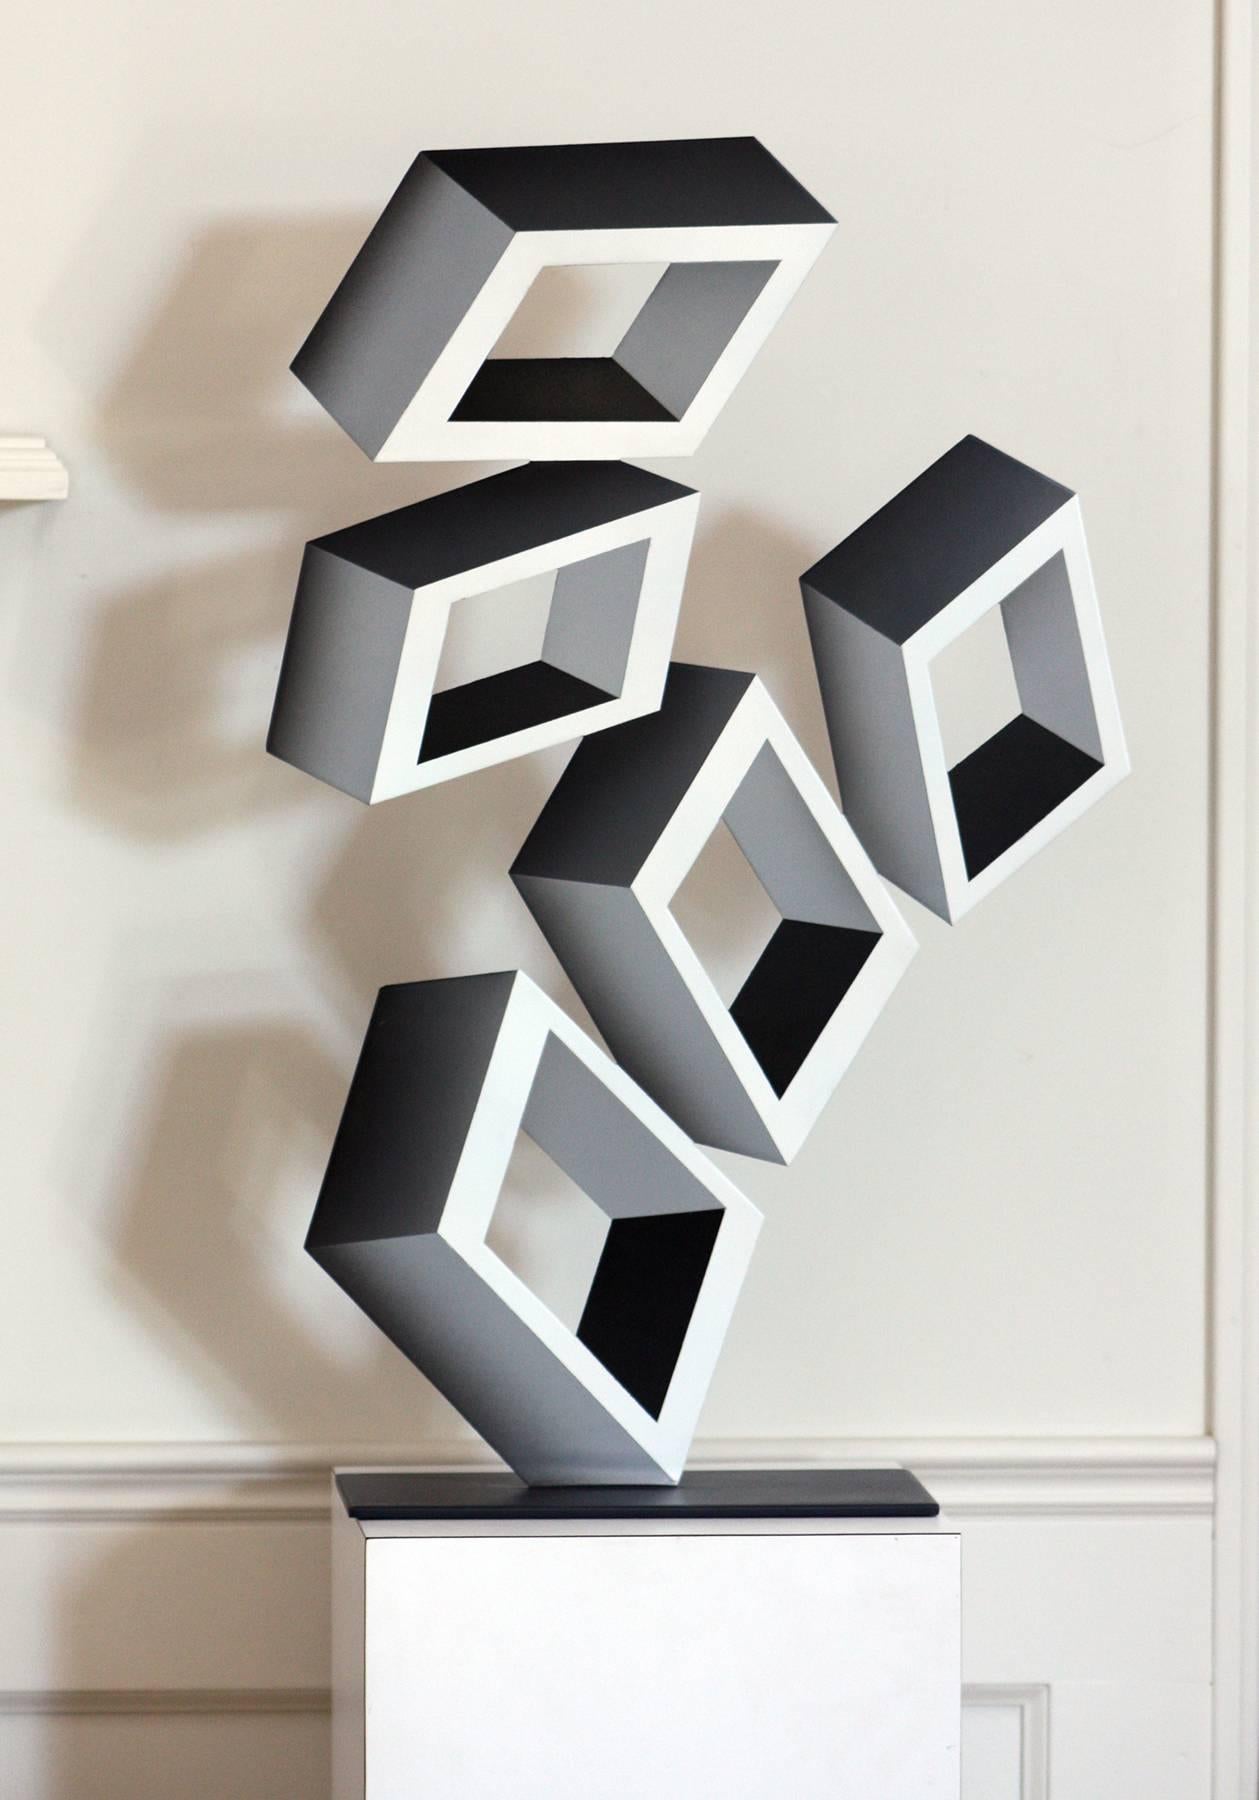 Sanseviero Abstract Sculpture - "5 White Boxes", Painted Metal, illusion sculpture